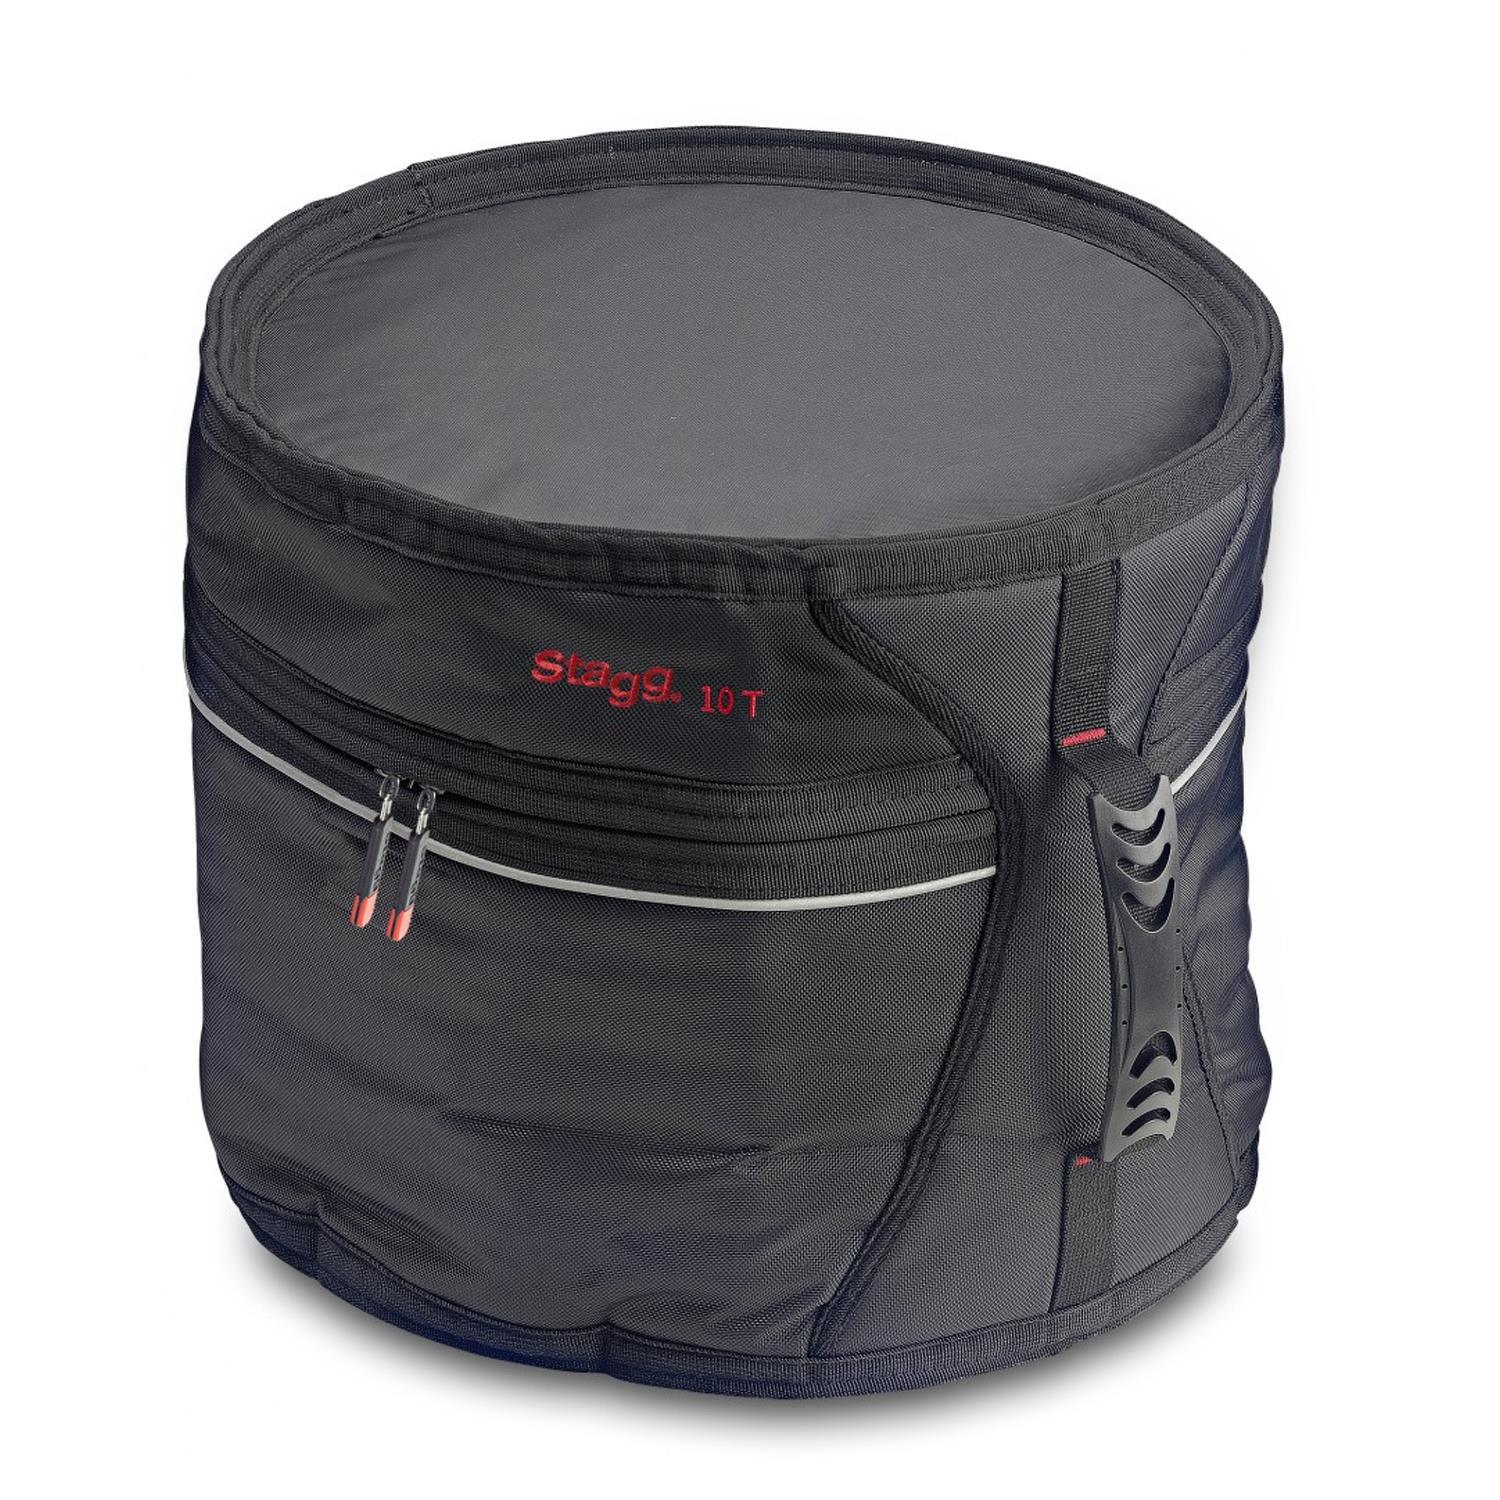 Stagg STTB-10 10" Professional Tom Bag - DY Pro Audio